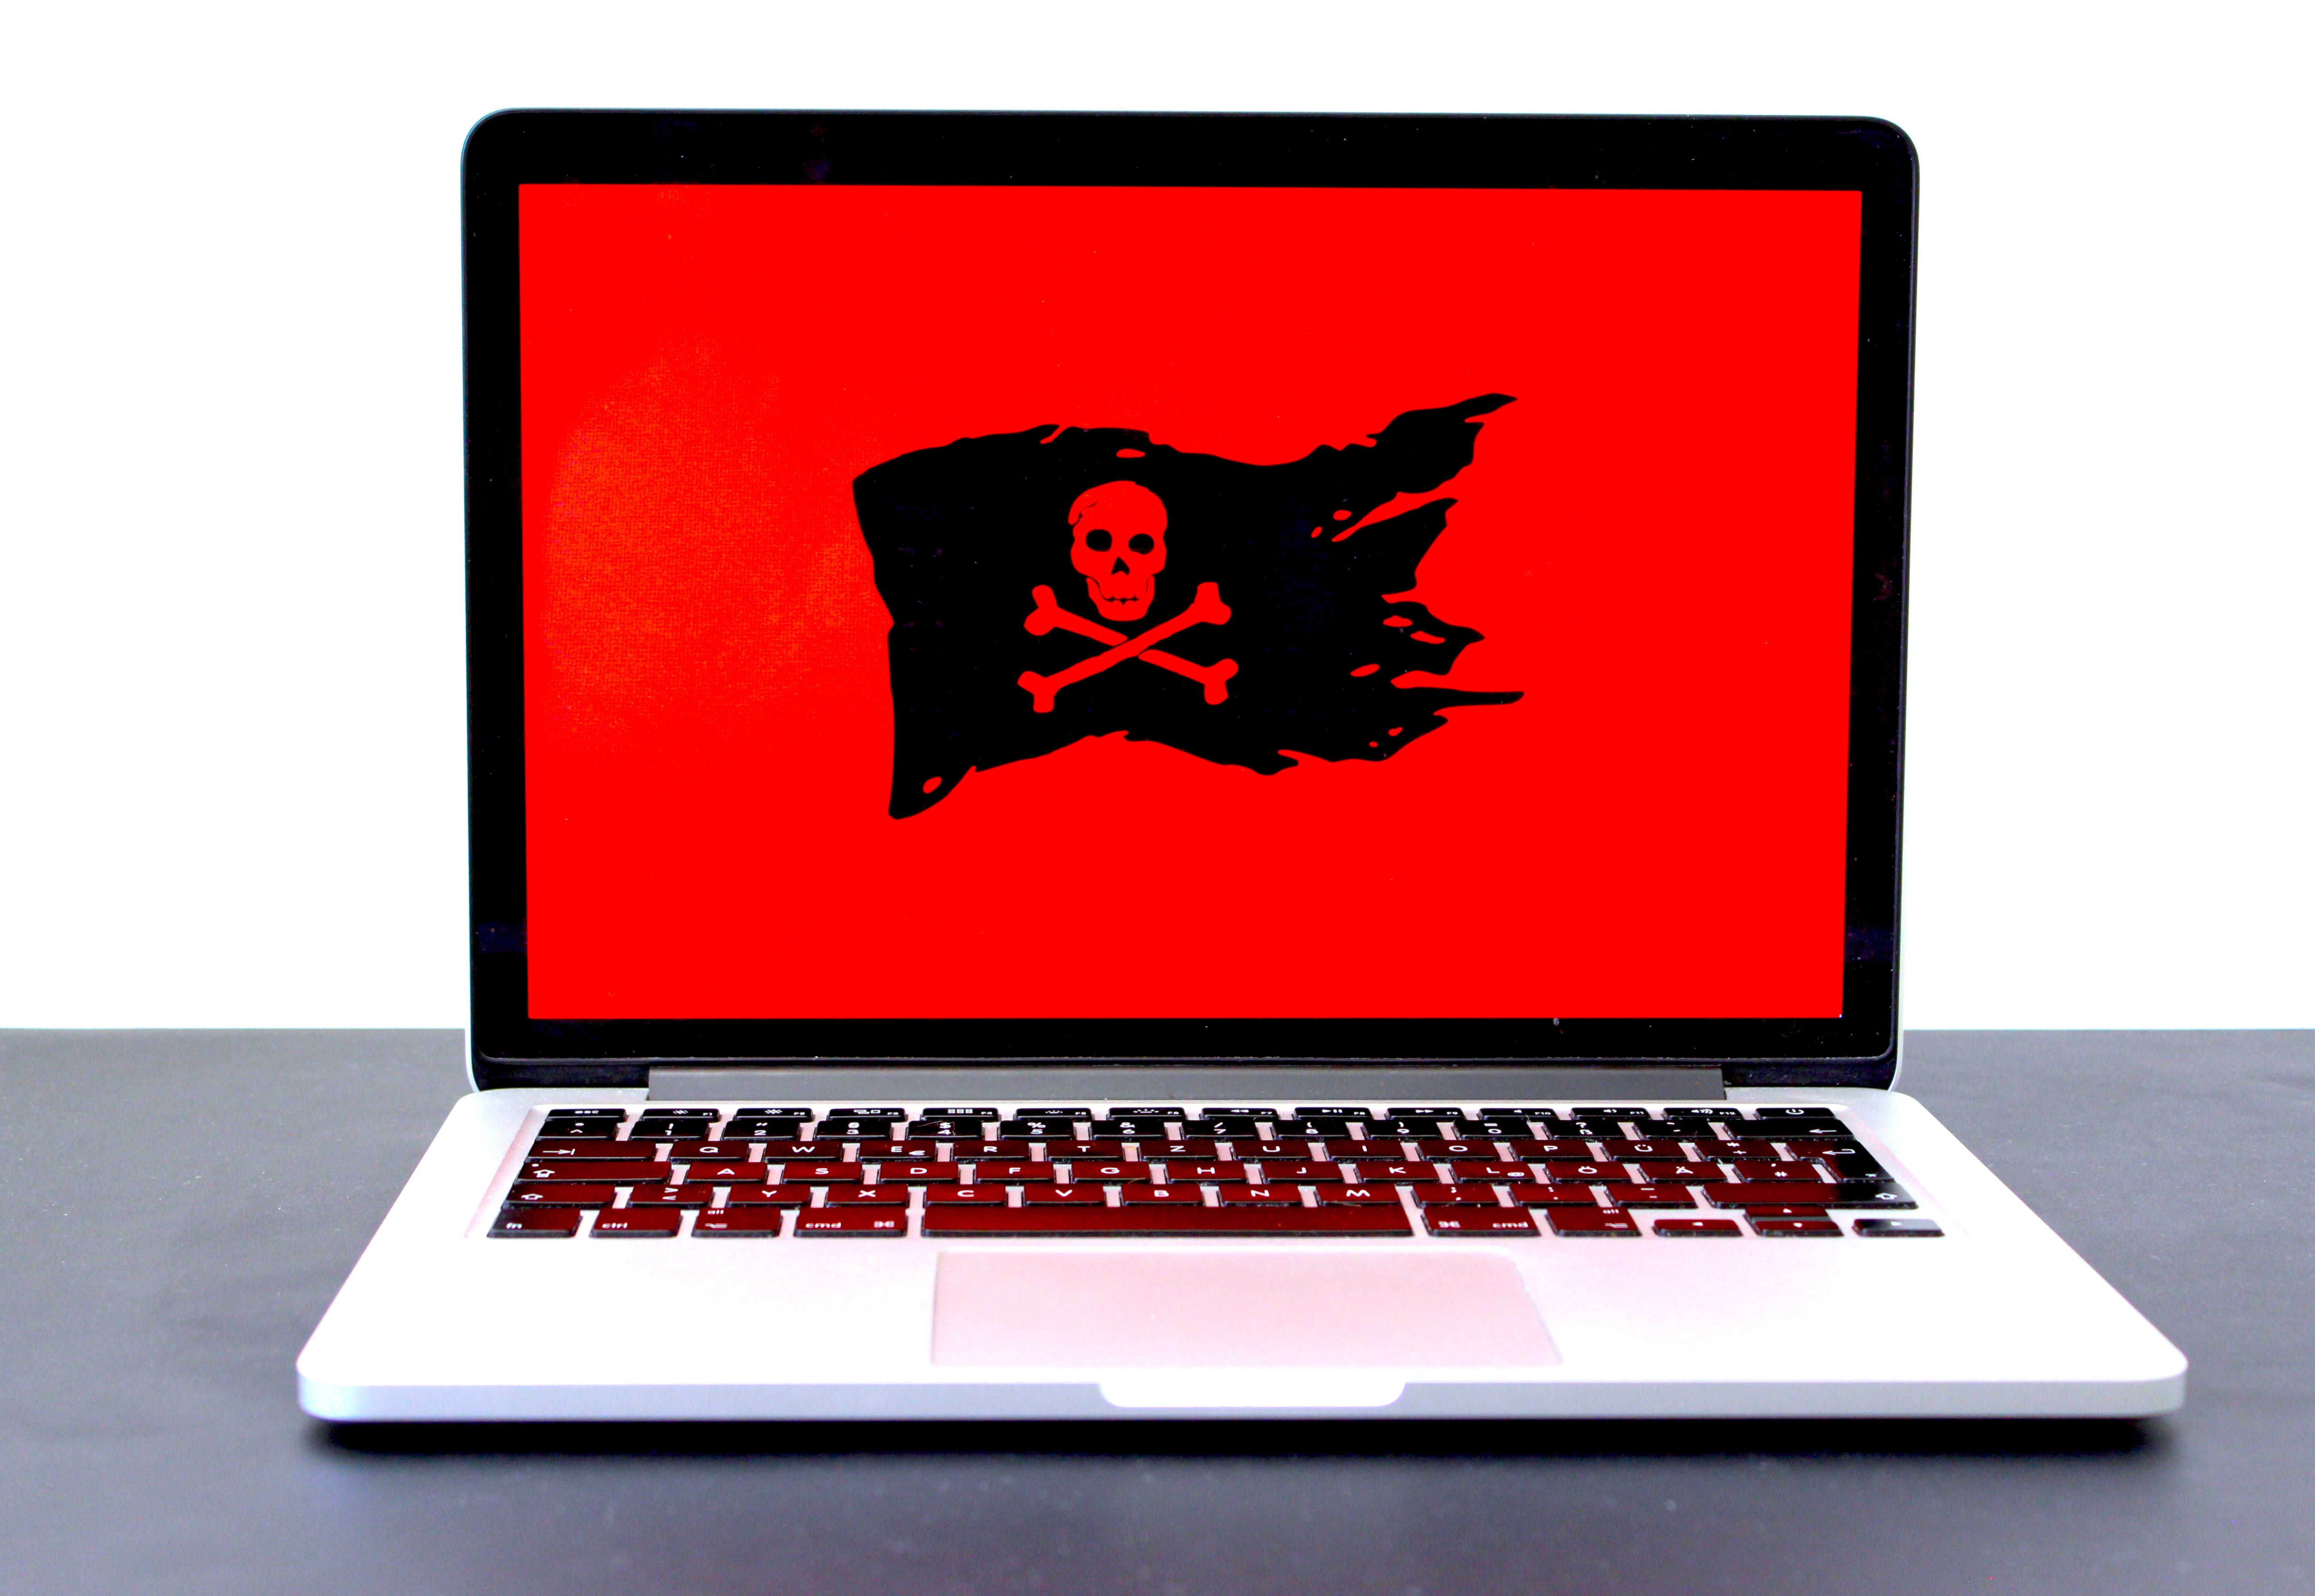 Laptop displaying a pirate flag / jolly roger on a red screen, possibly indicating malware, hackers or a different computer problem. Image by Michael Geiger, via Unsplash.com.